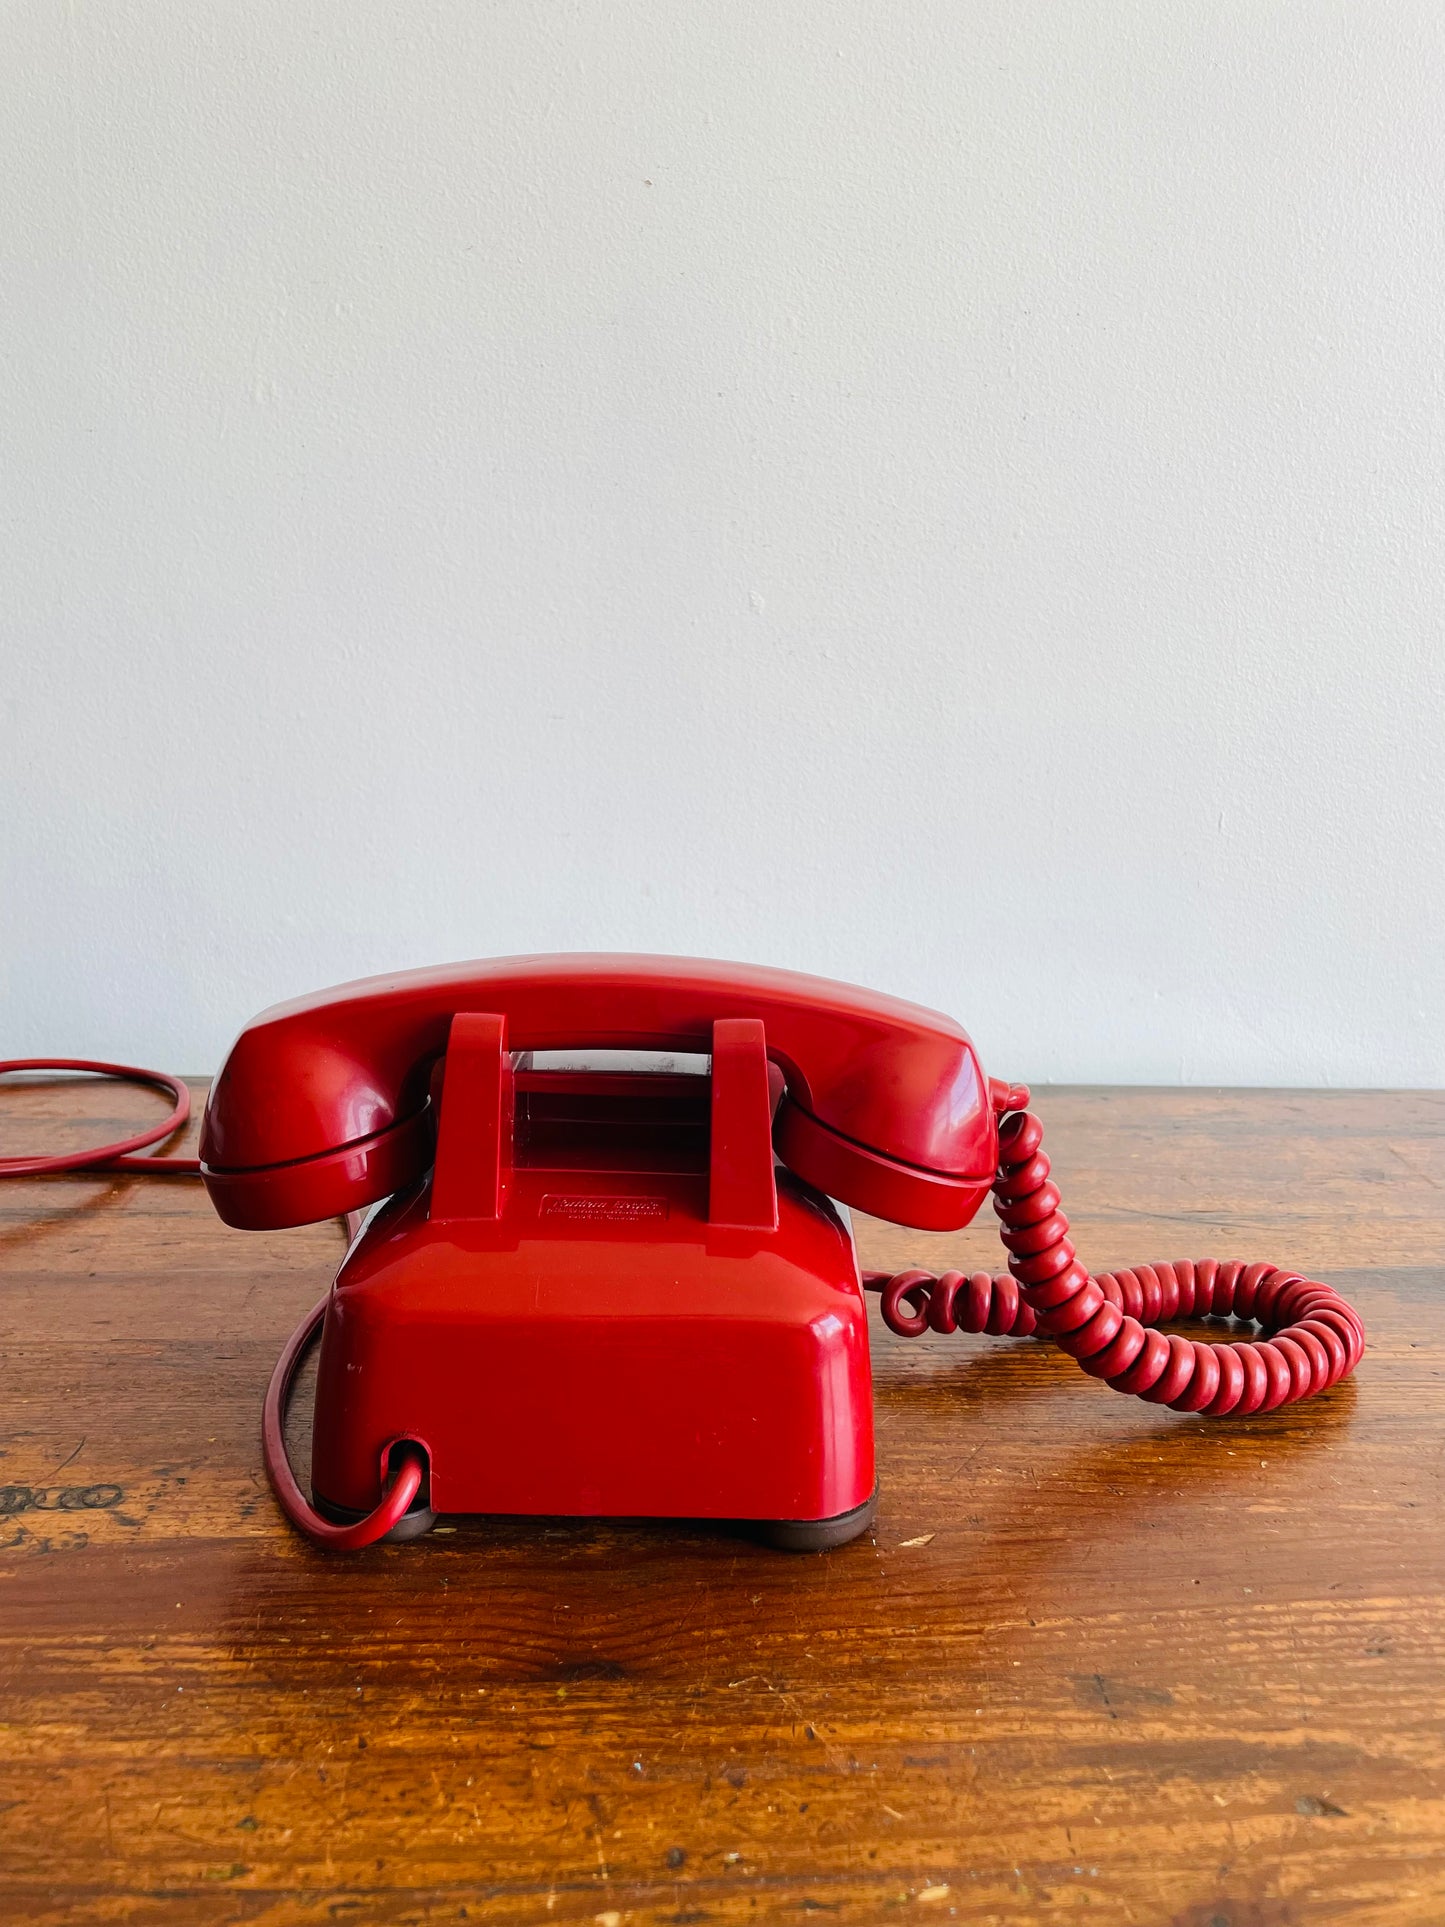 1950s Northern Electric Company Cherry Red Rotary Landline Phone - Made in Canada